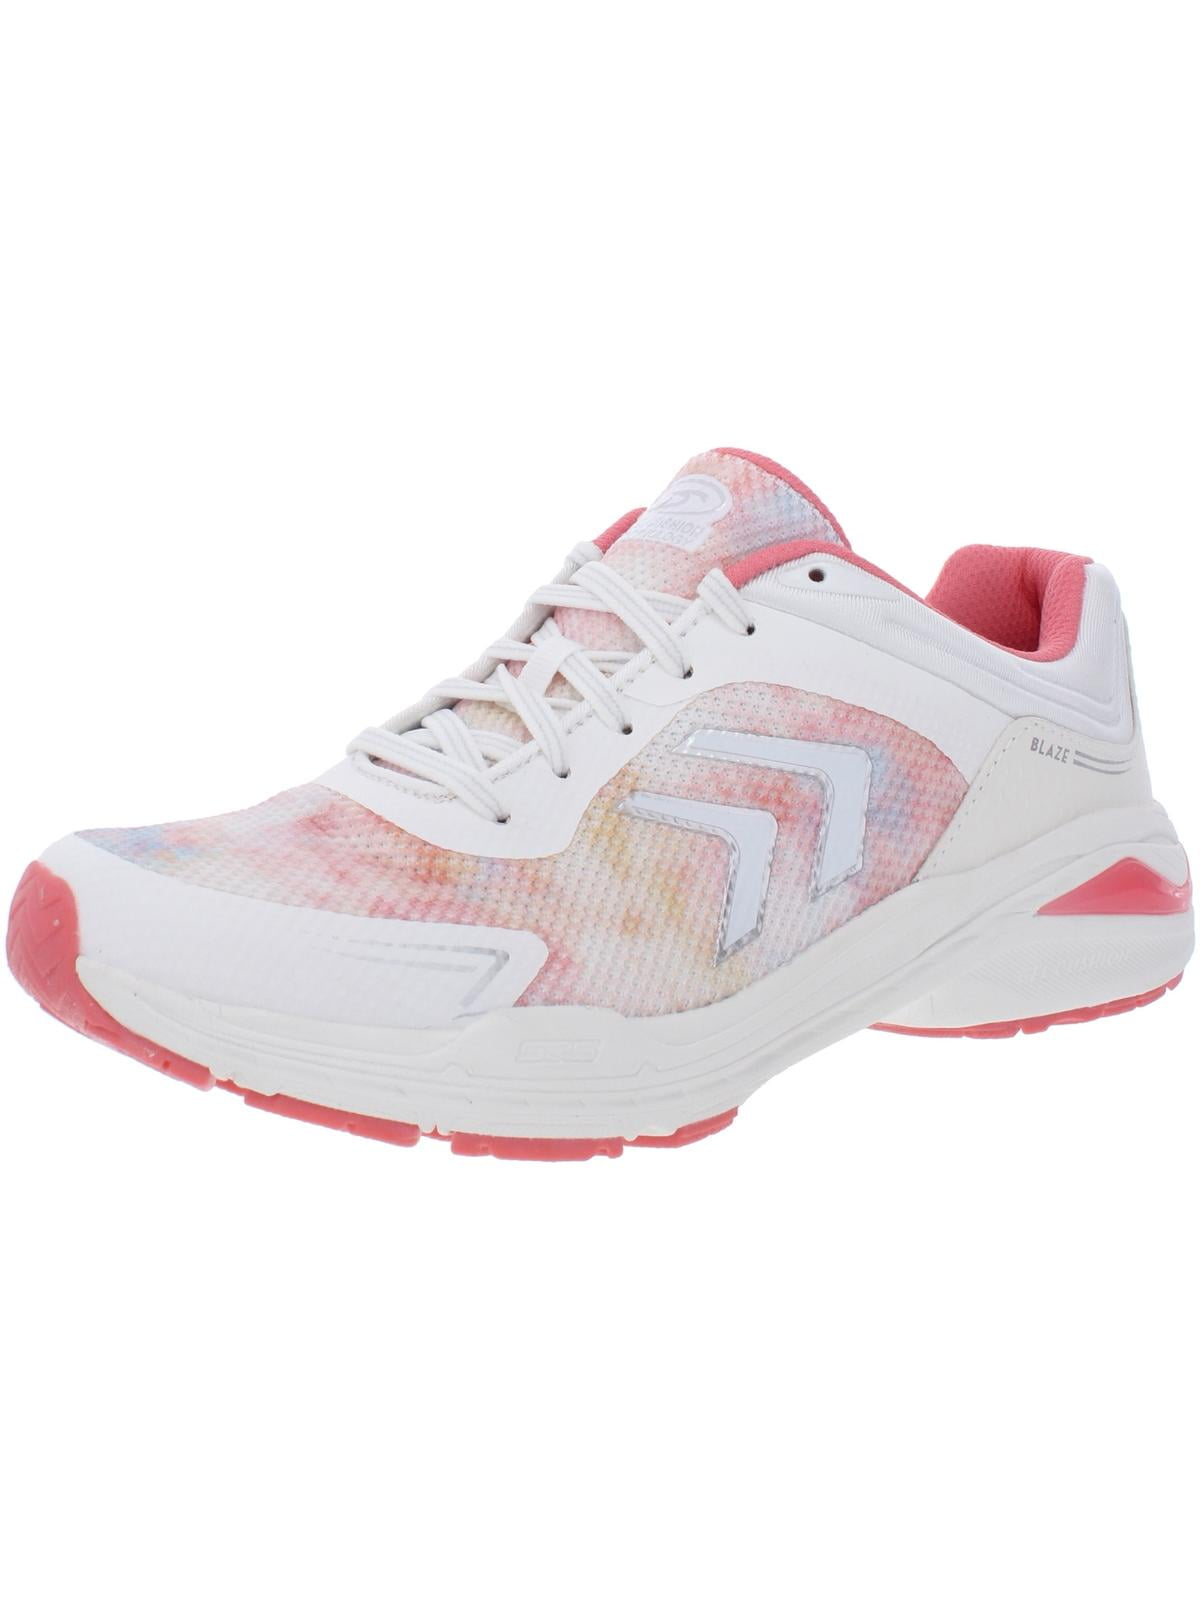 Womens Athletic Running Shoes WHITE PINK Light Weight SIZE 6.5 7.5 8 8.5 10 11